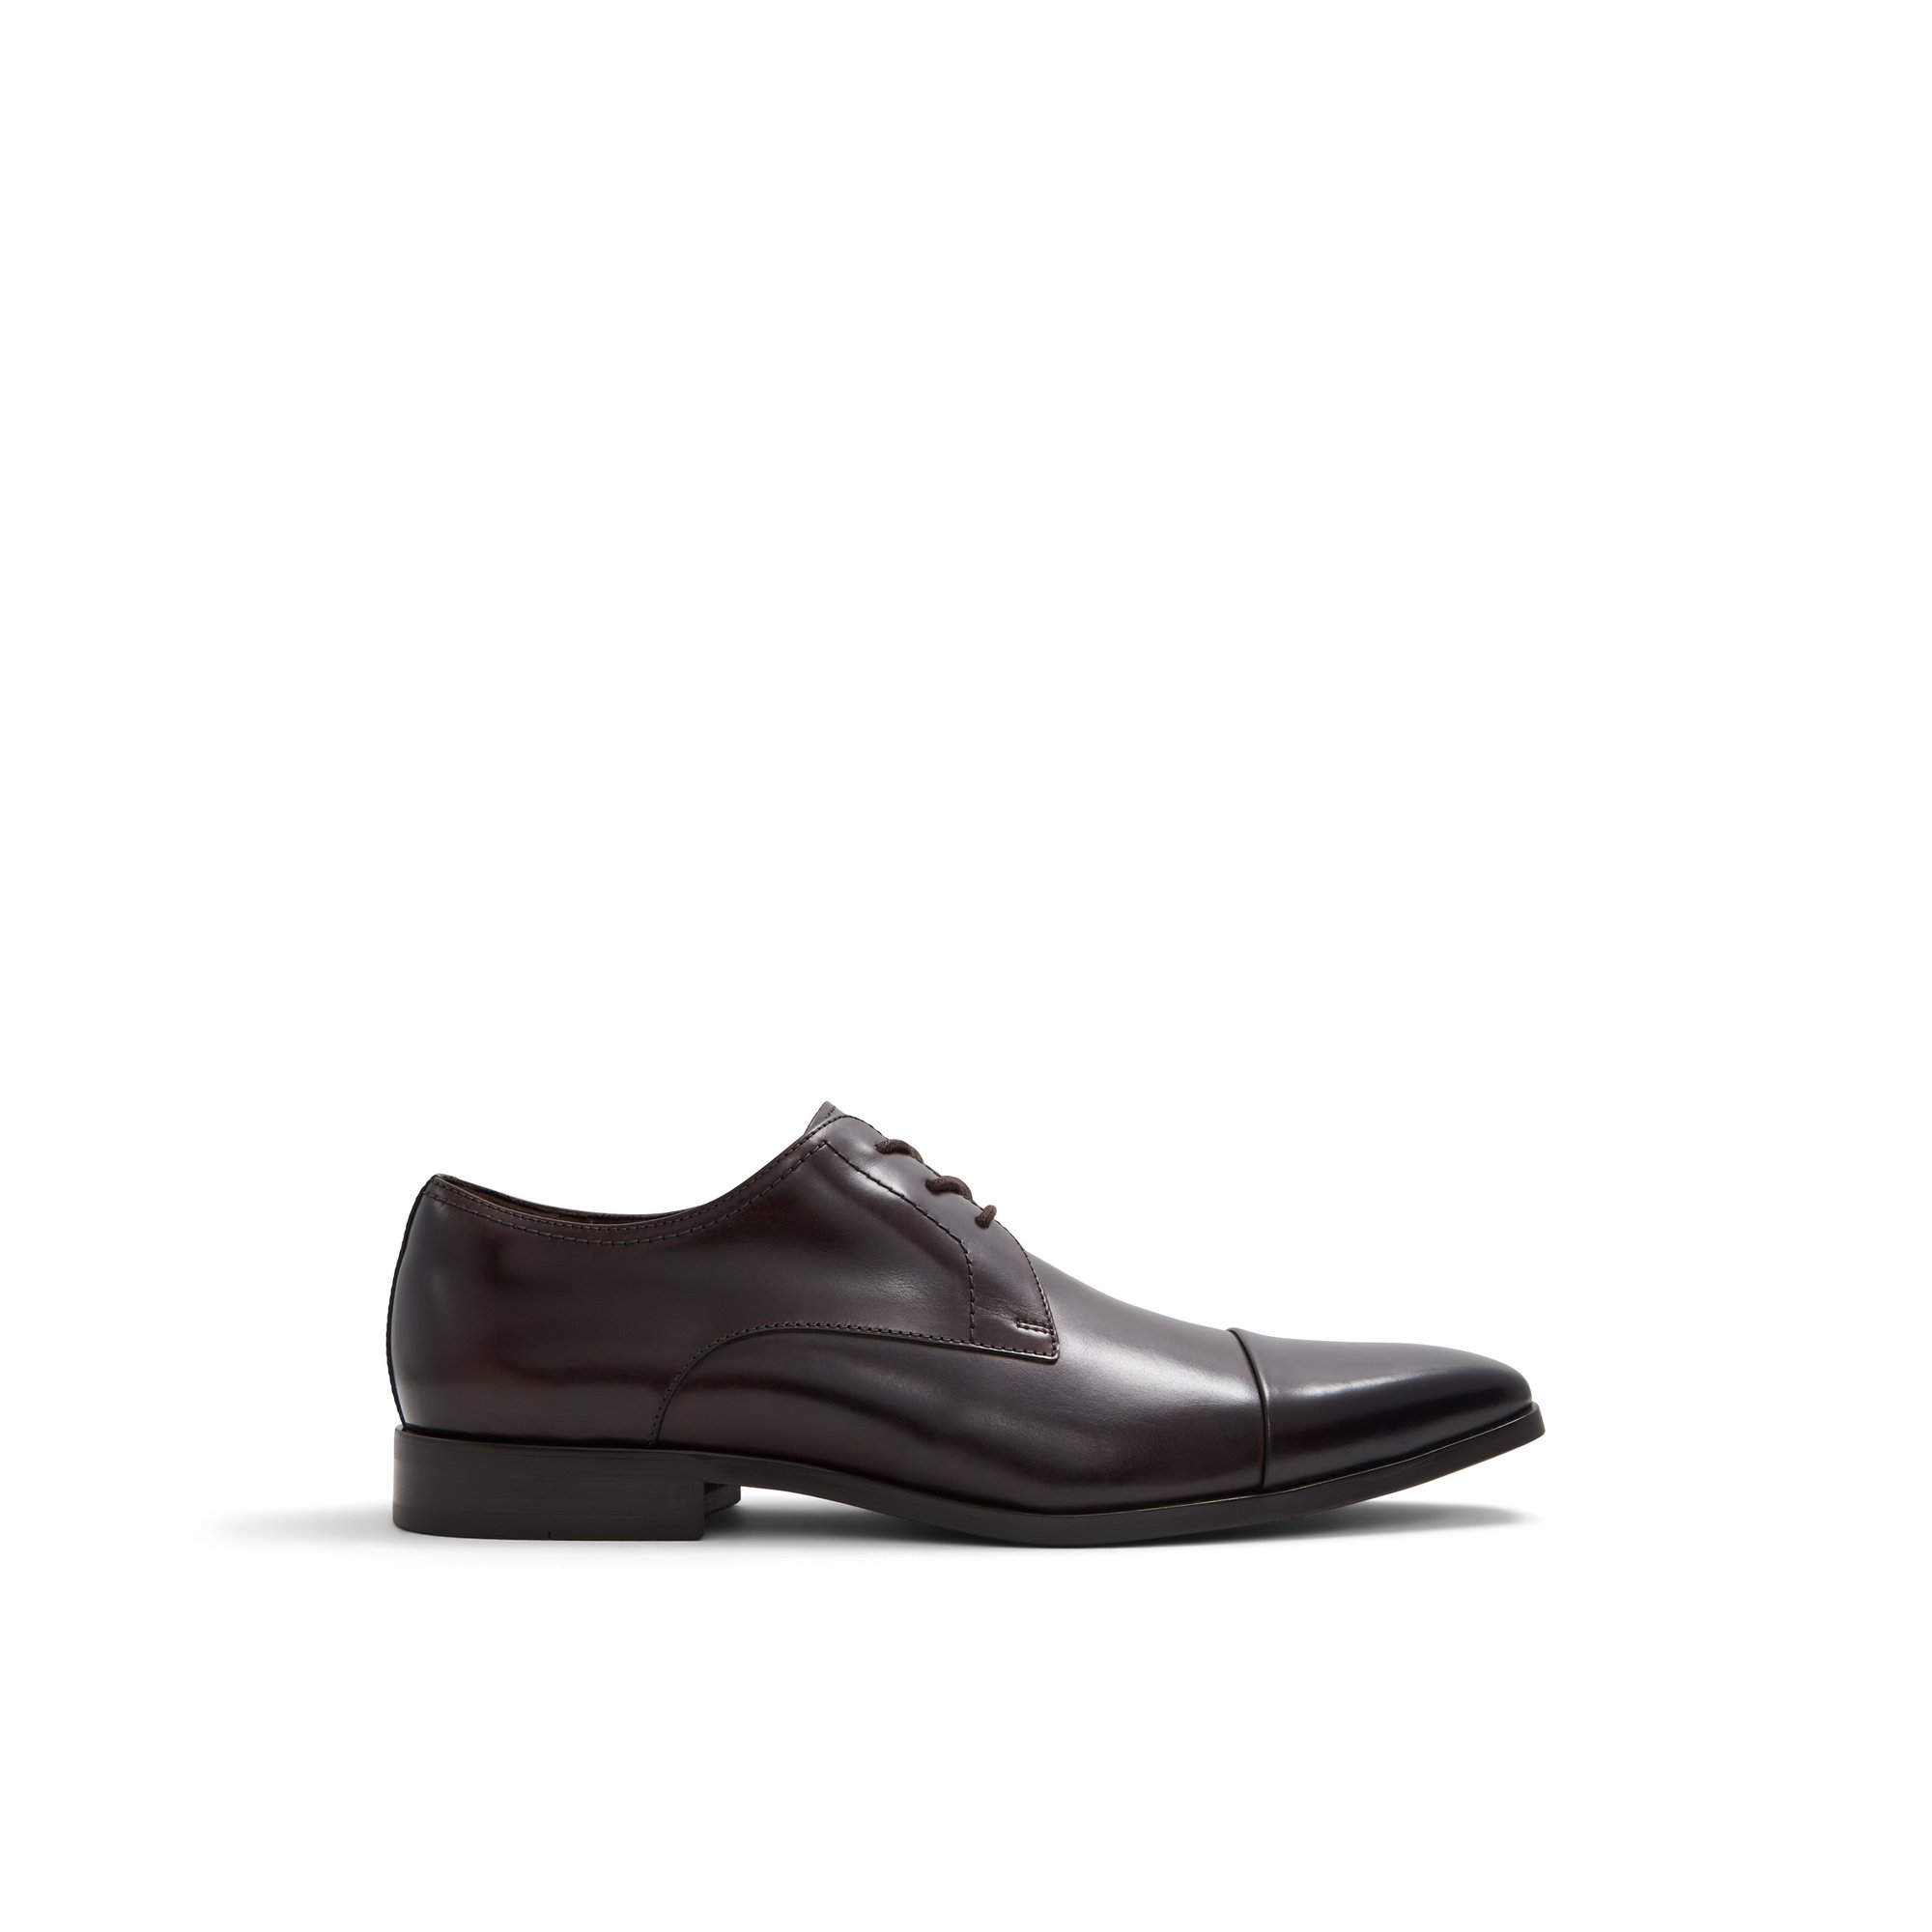 ALDO Mulligan - Men's Oxfords and Lace up - Brown